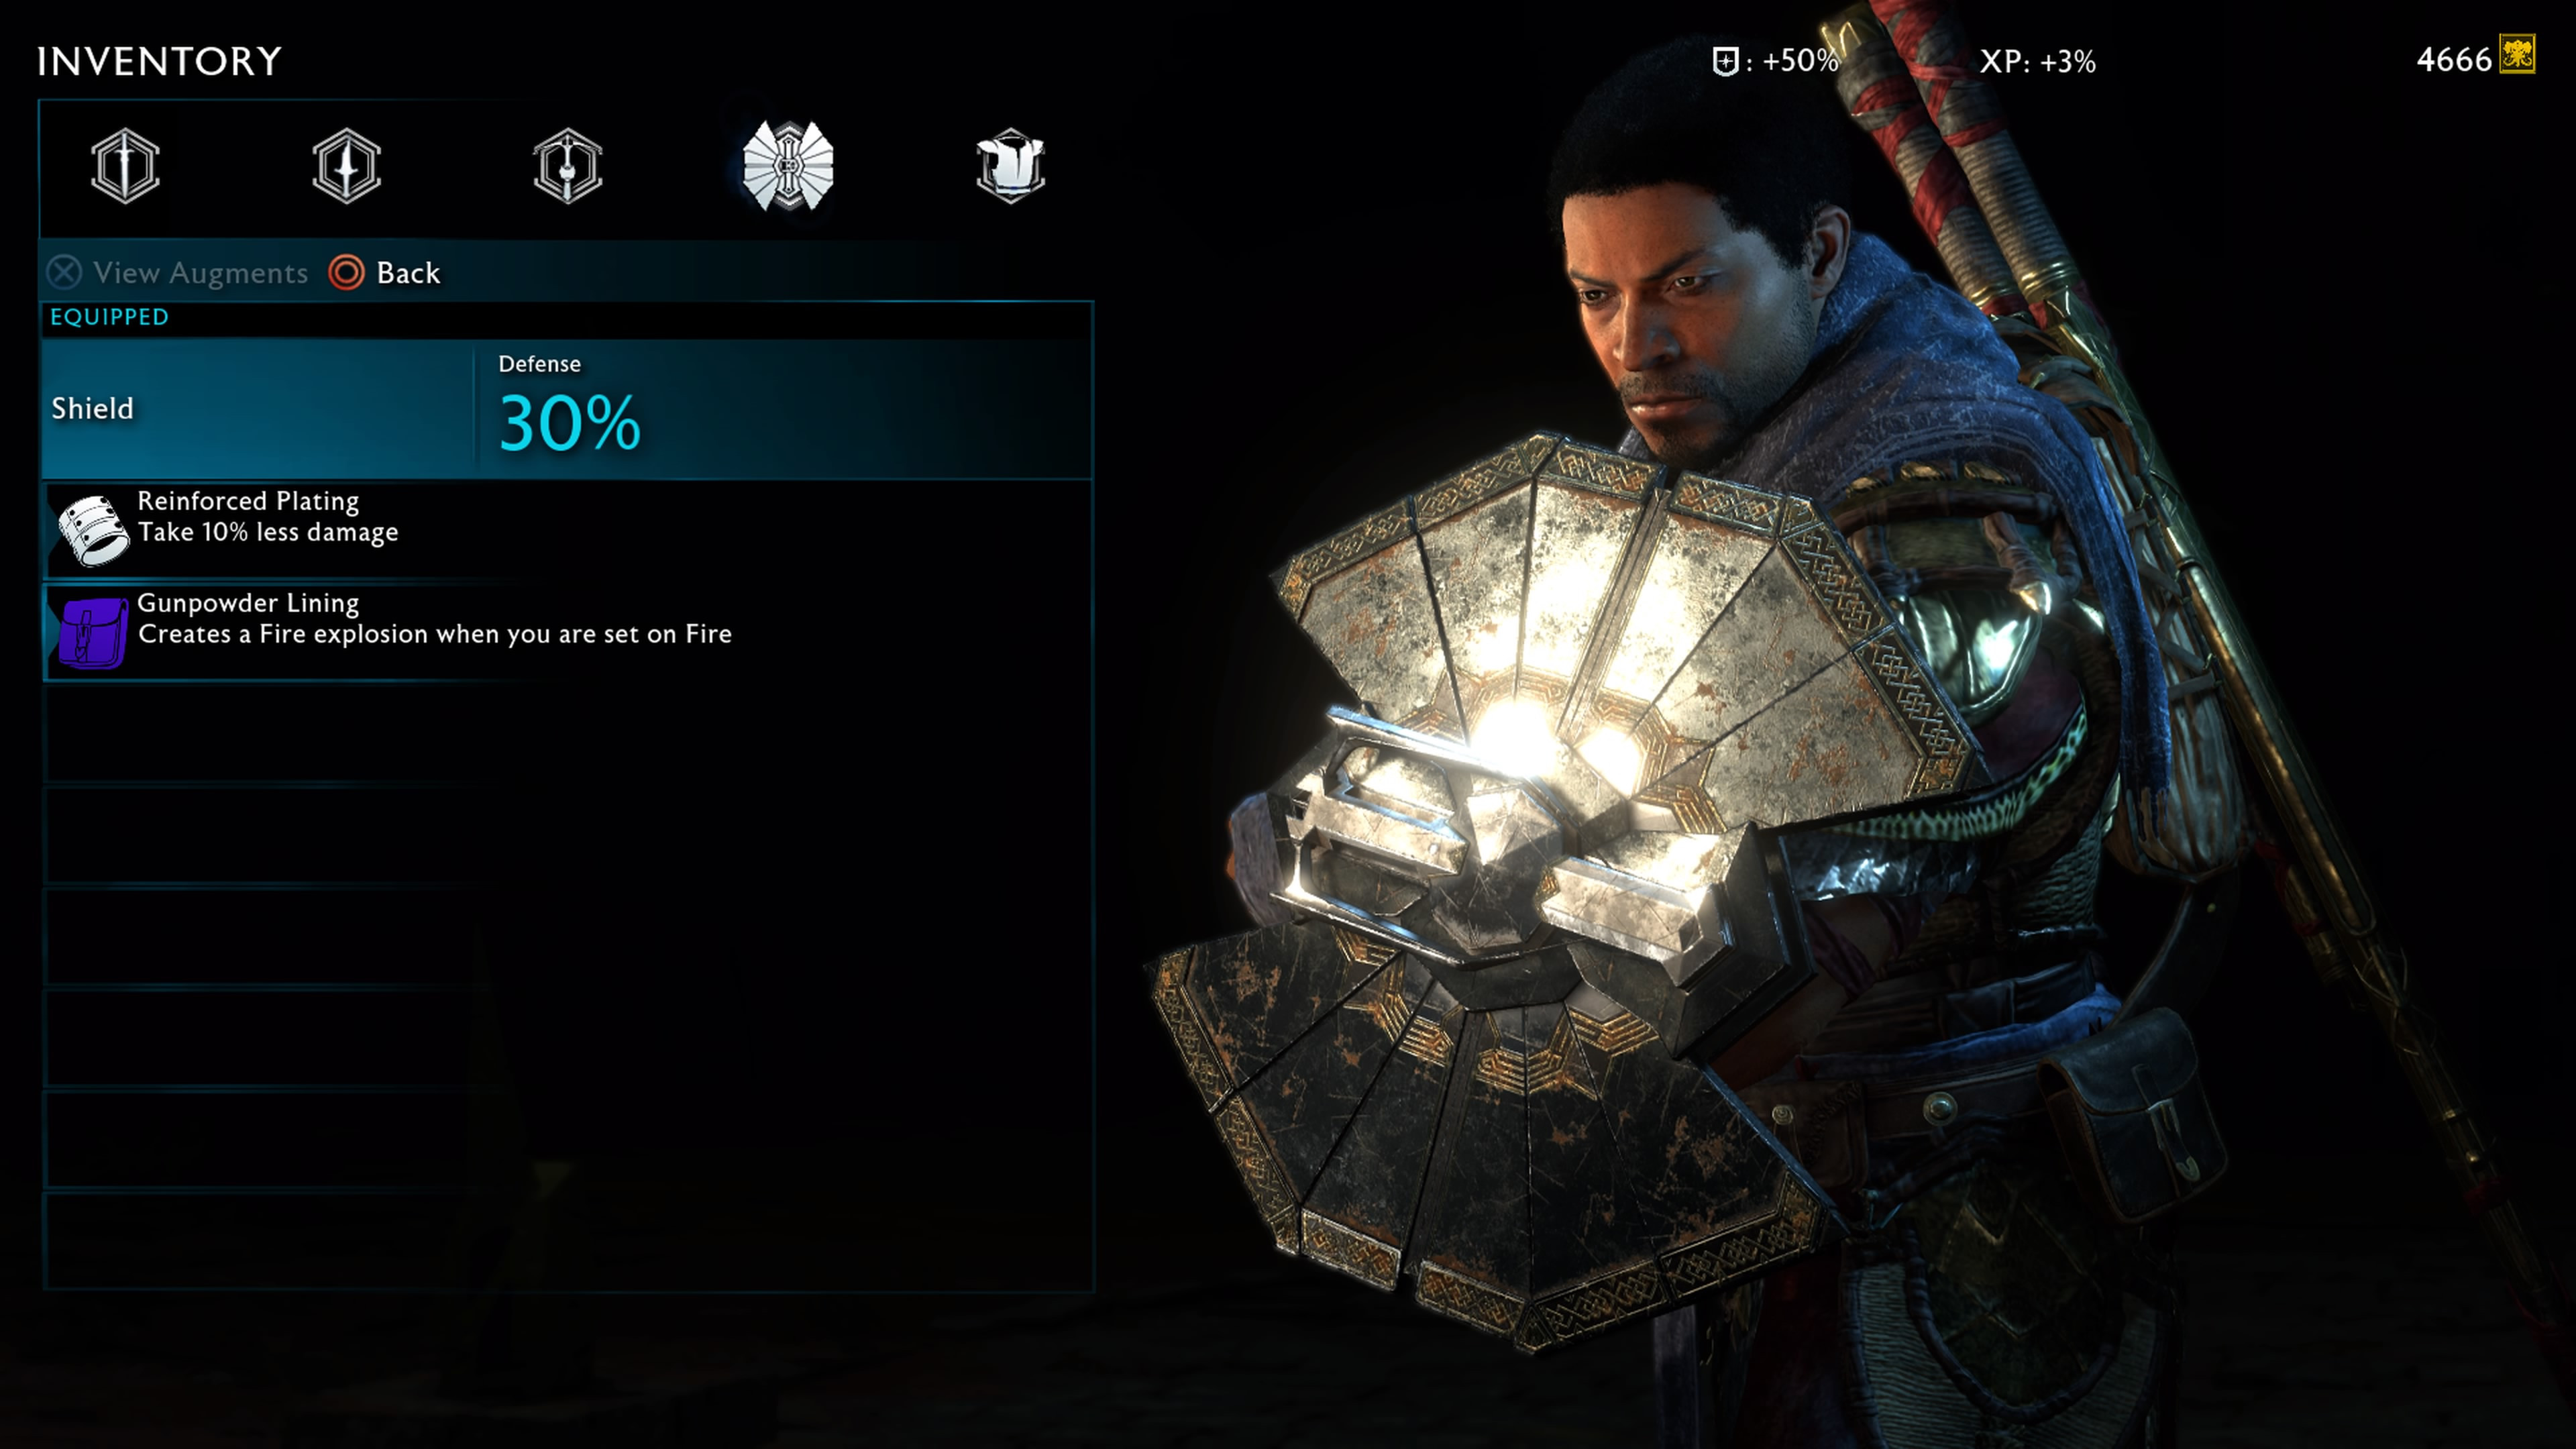 Middle-earth: Shadow of Mordor Characters - Giant Bomb